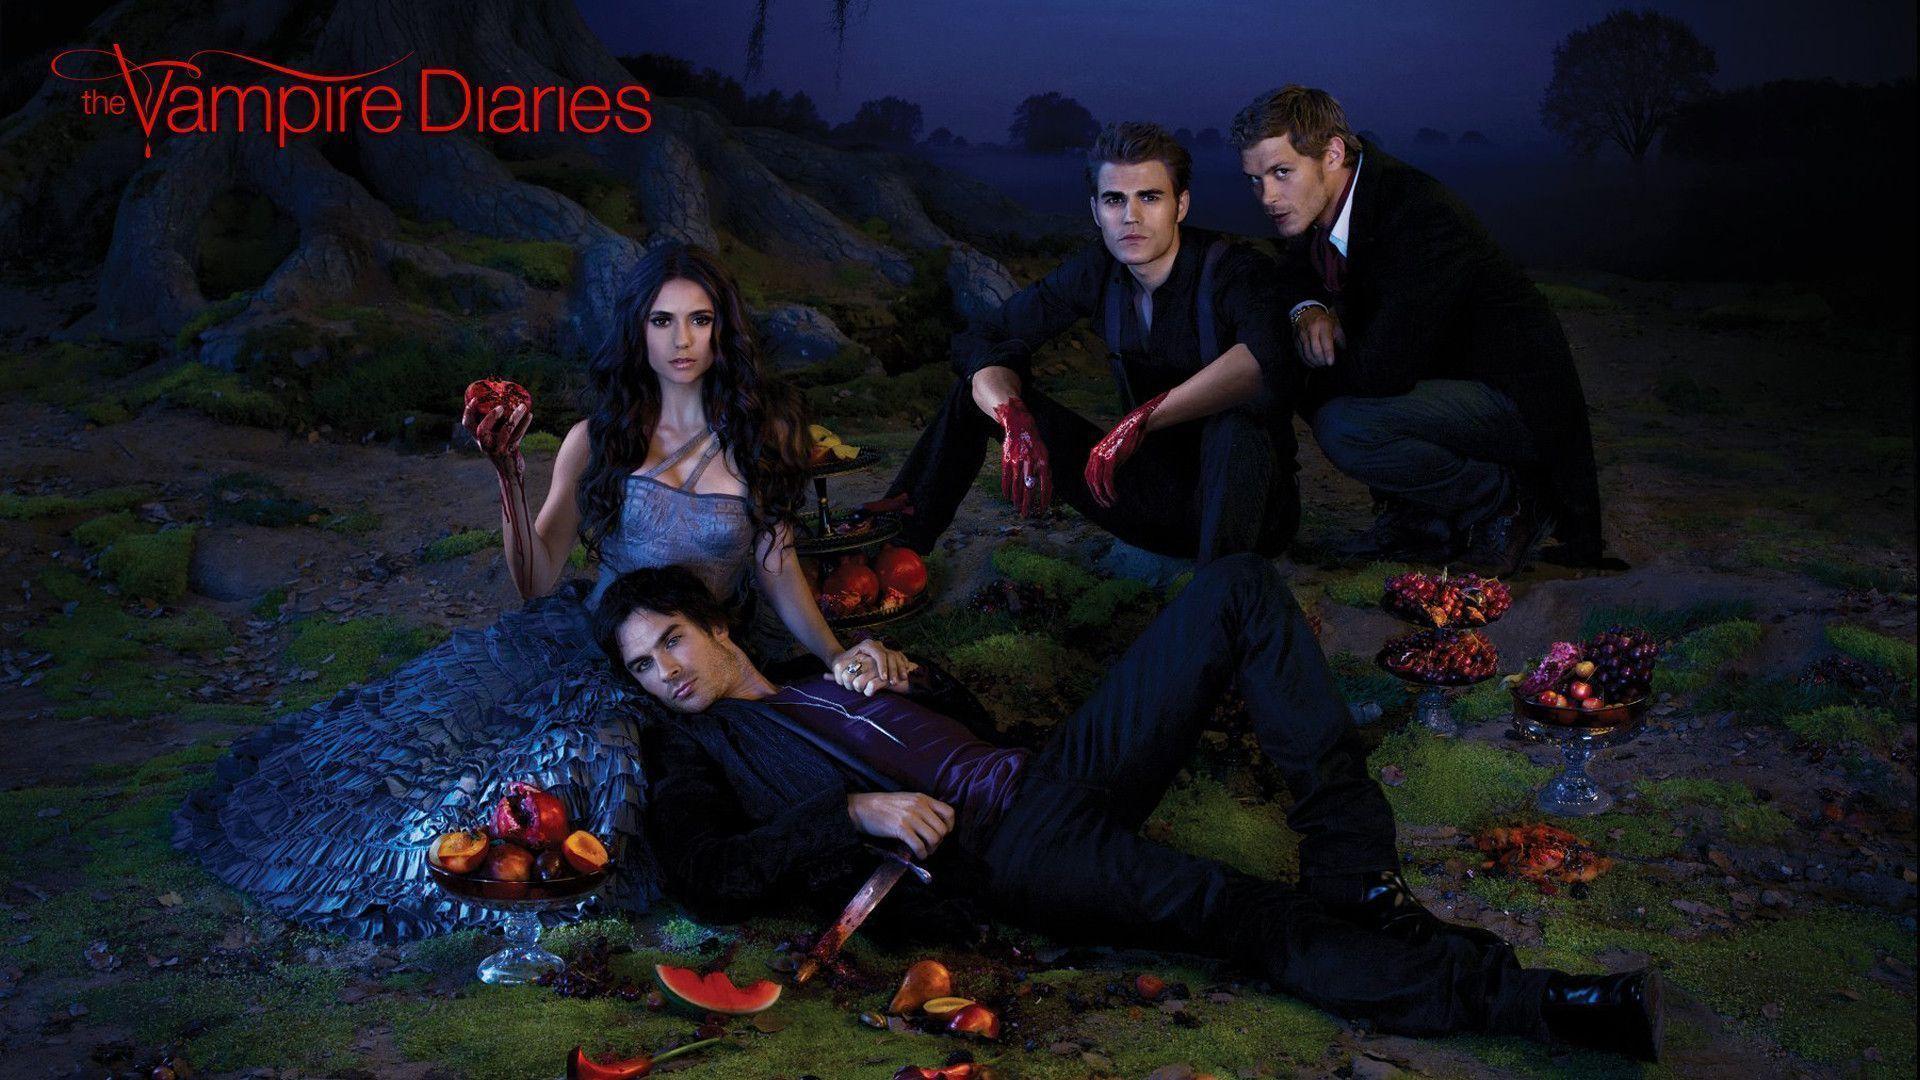 582959 1920x1200 the vampire diaries images for desktop background  Rare  Gallery HD Wallpapers